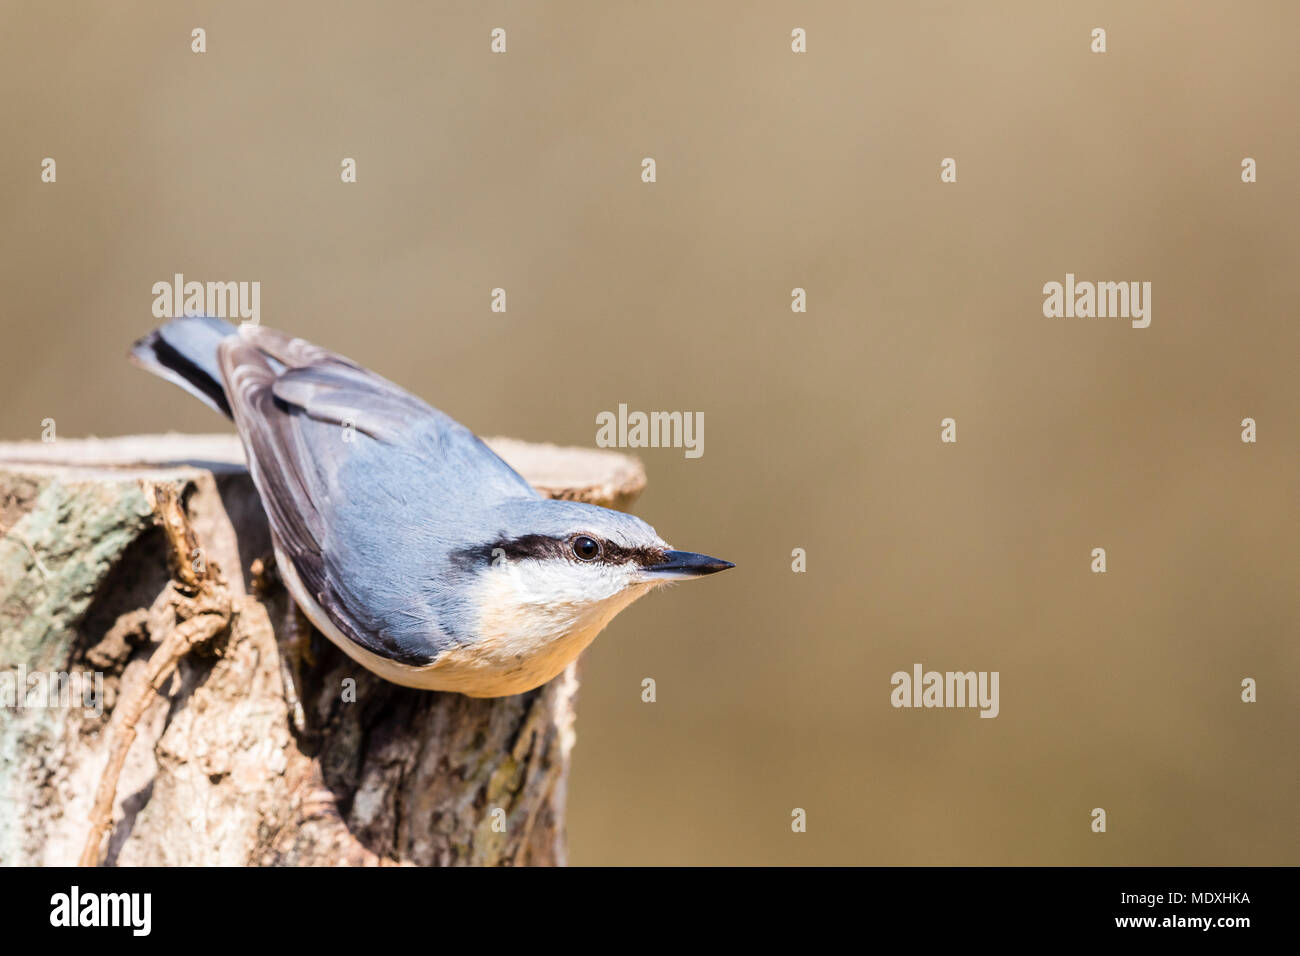 Aberystwyth, Ceredigion, Wales, UK. April 21st 2018. A european nuthatch foraging on a warm, sunny, spring day in mid Wales. (C) Phil Jones/Alamy Live News Stock Photo